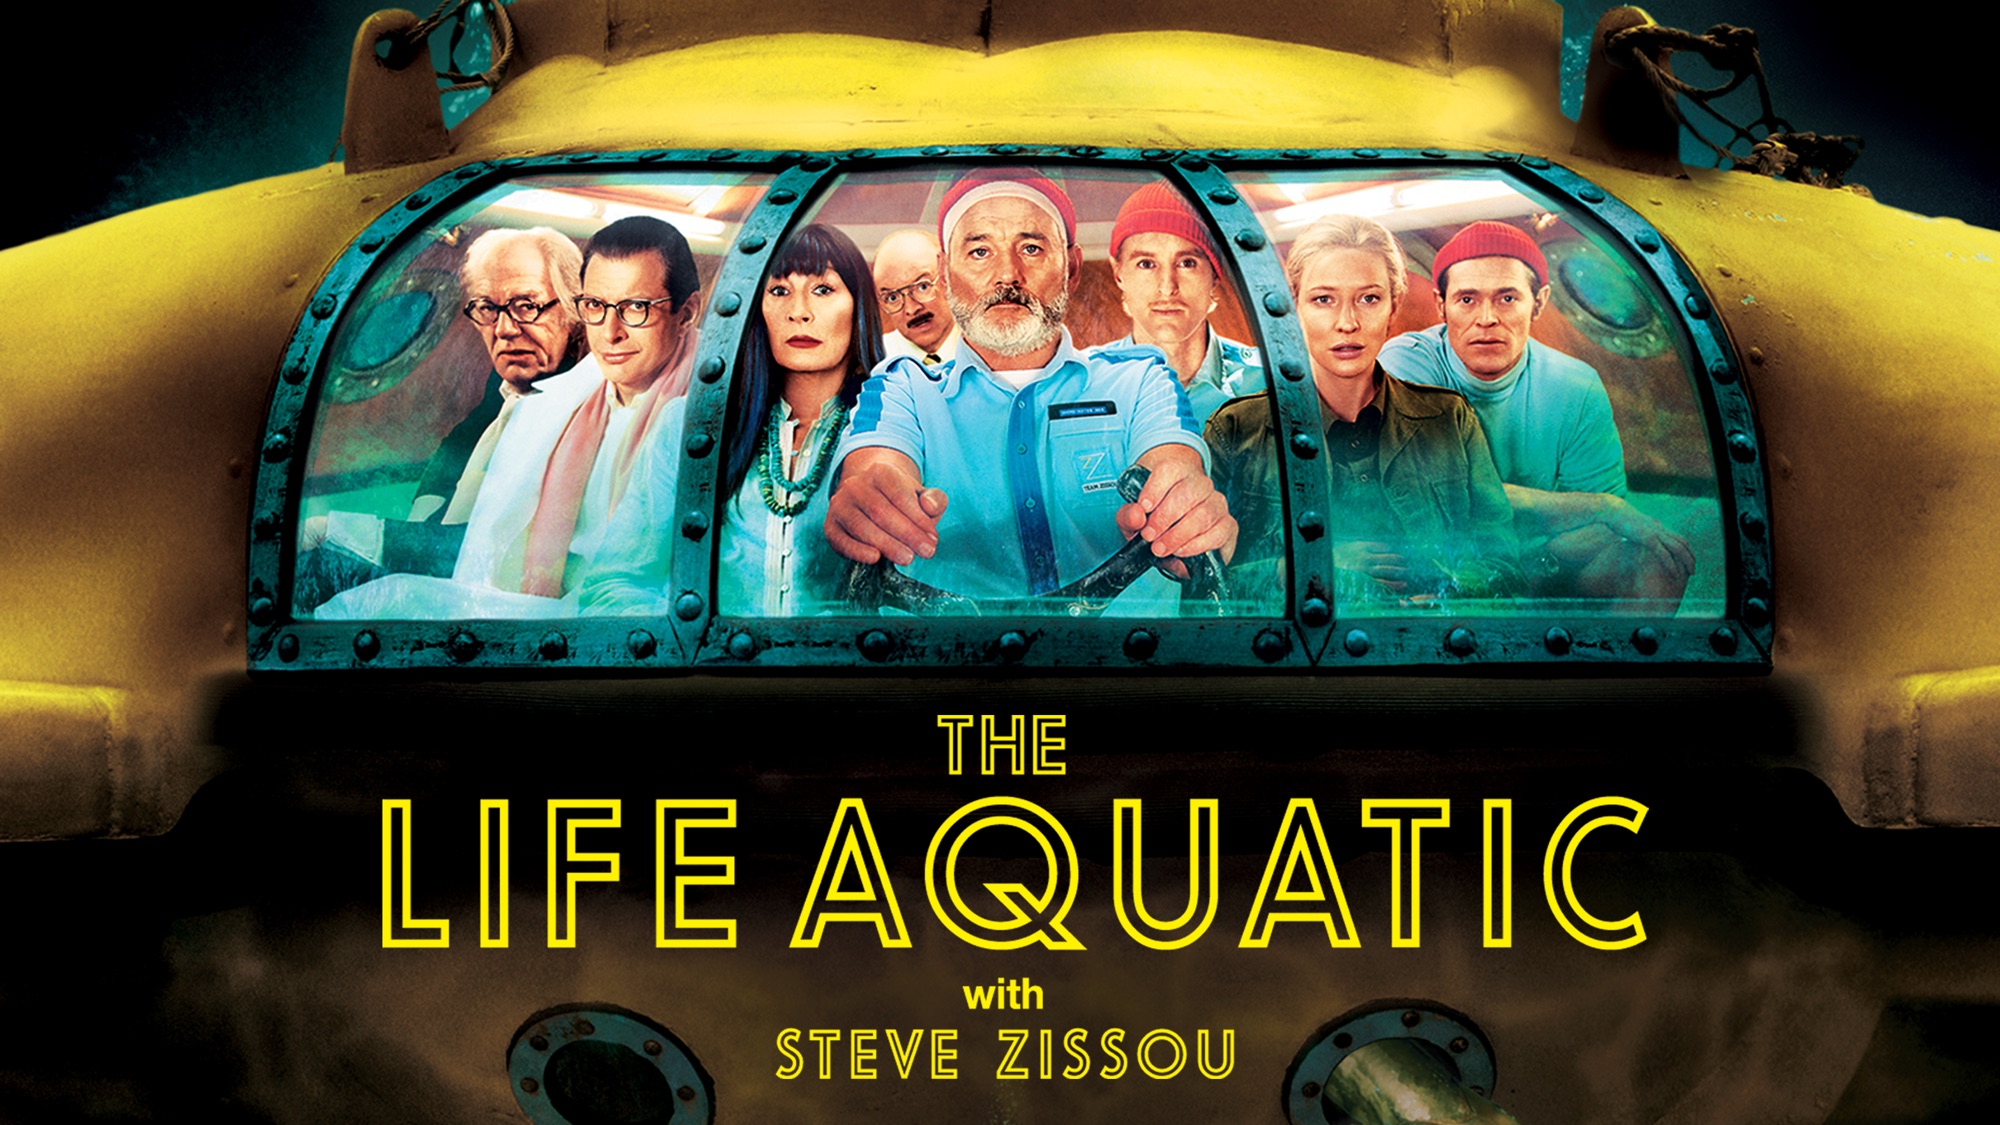 totle image for the film The Life Aquatic